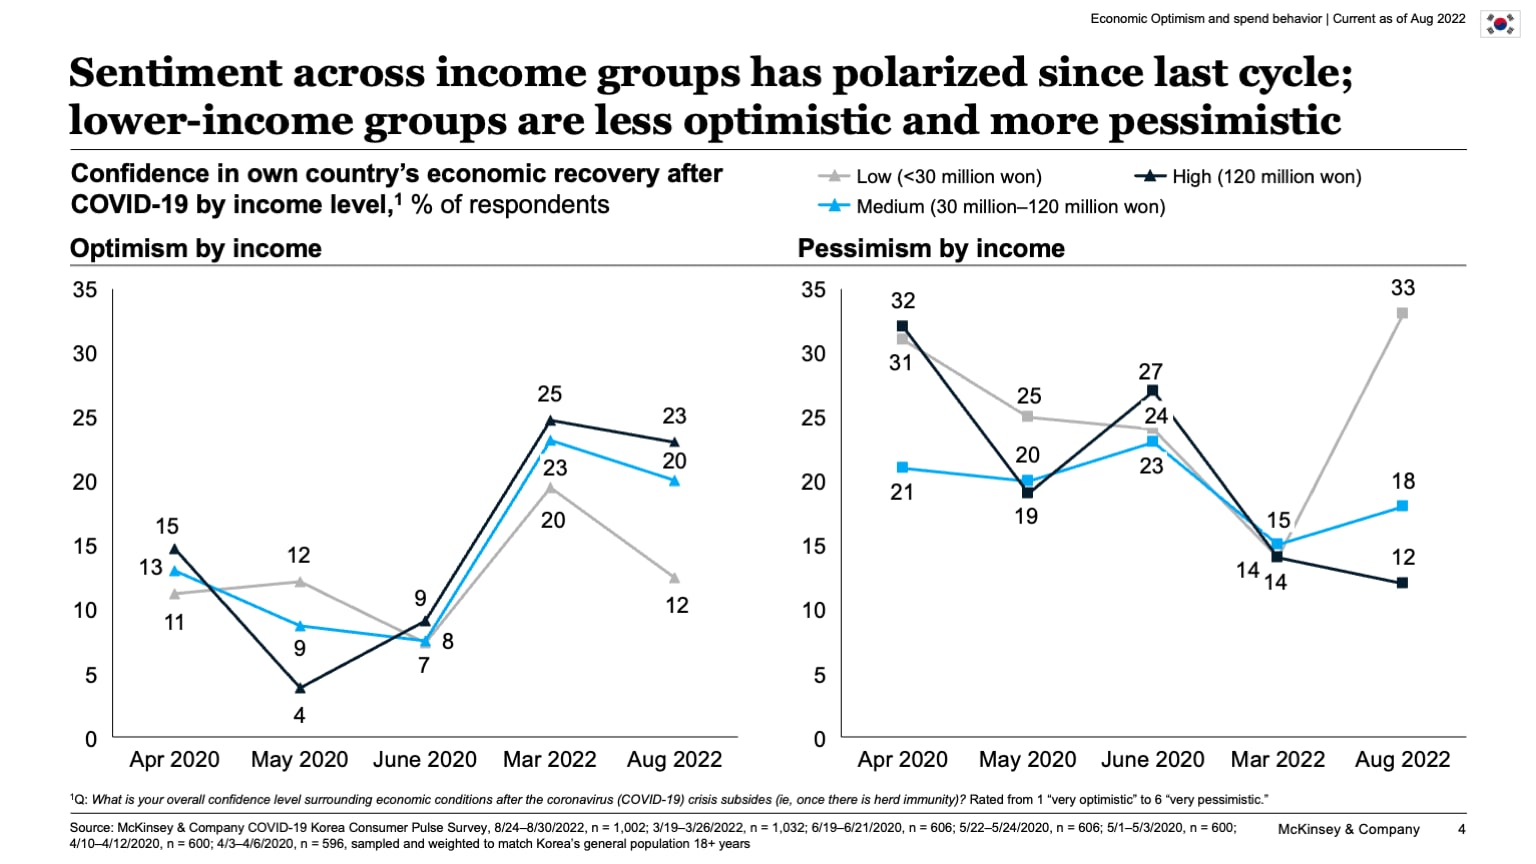 Sentiment across income groups has polarized since last cycle; lower-income groups are less optimistic and more pessimistic